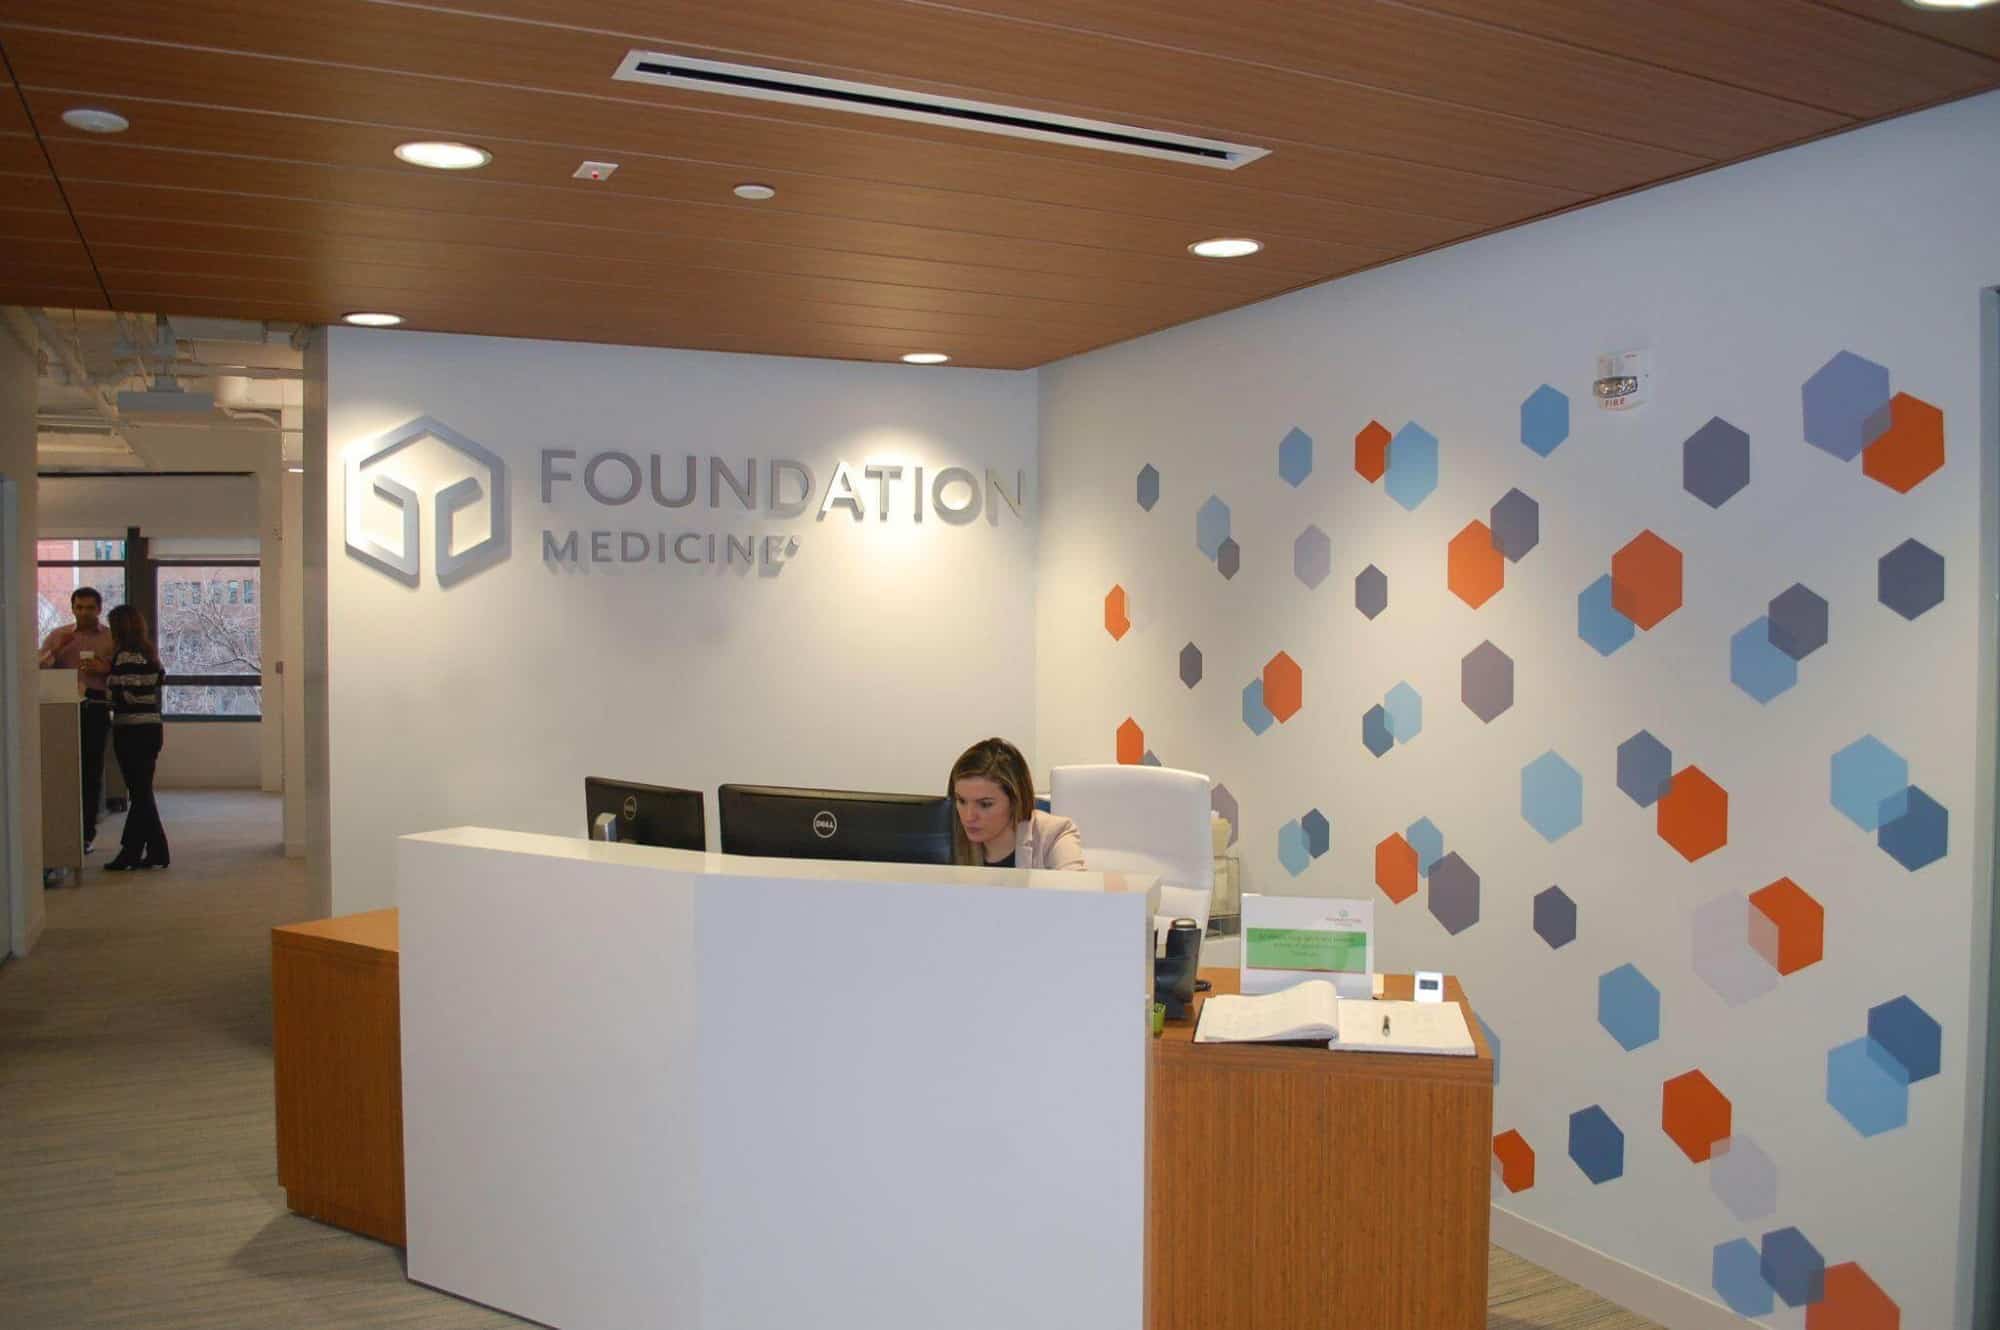 A dimensional letter logo with an aluminum finish at Foundation Medicine’s offices.